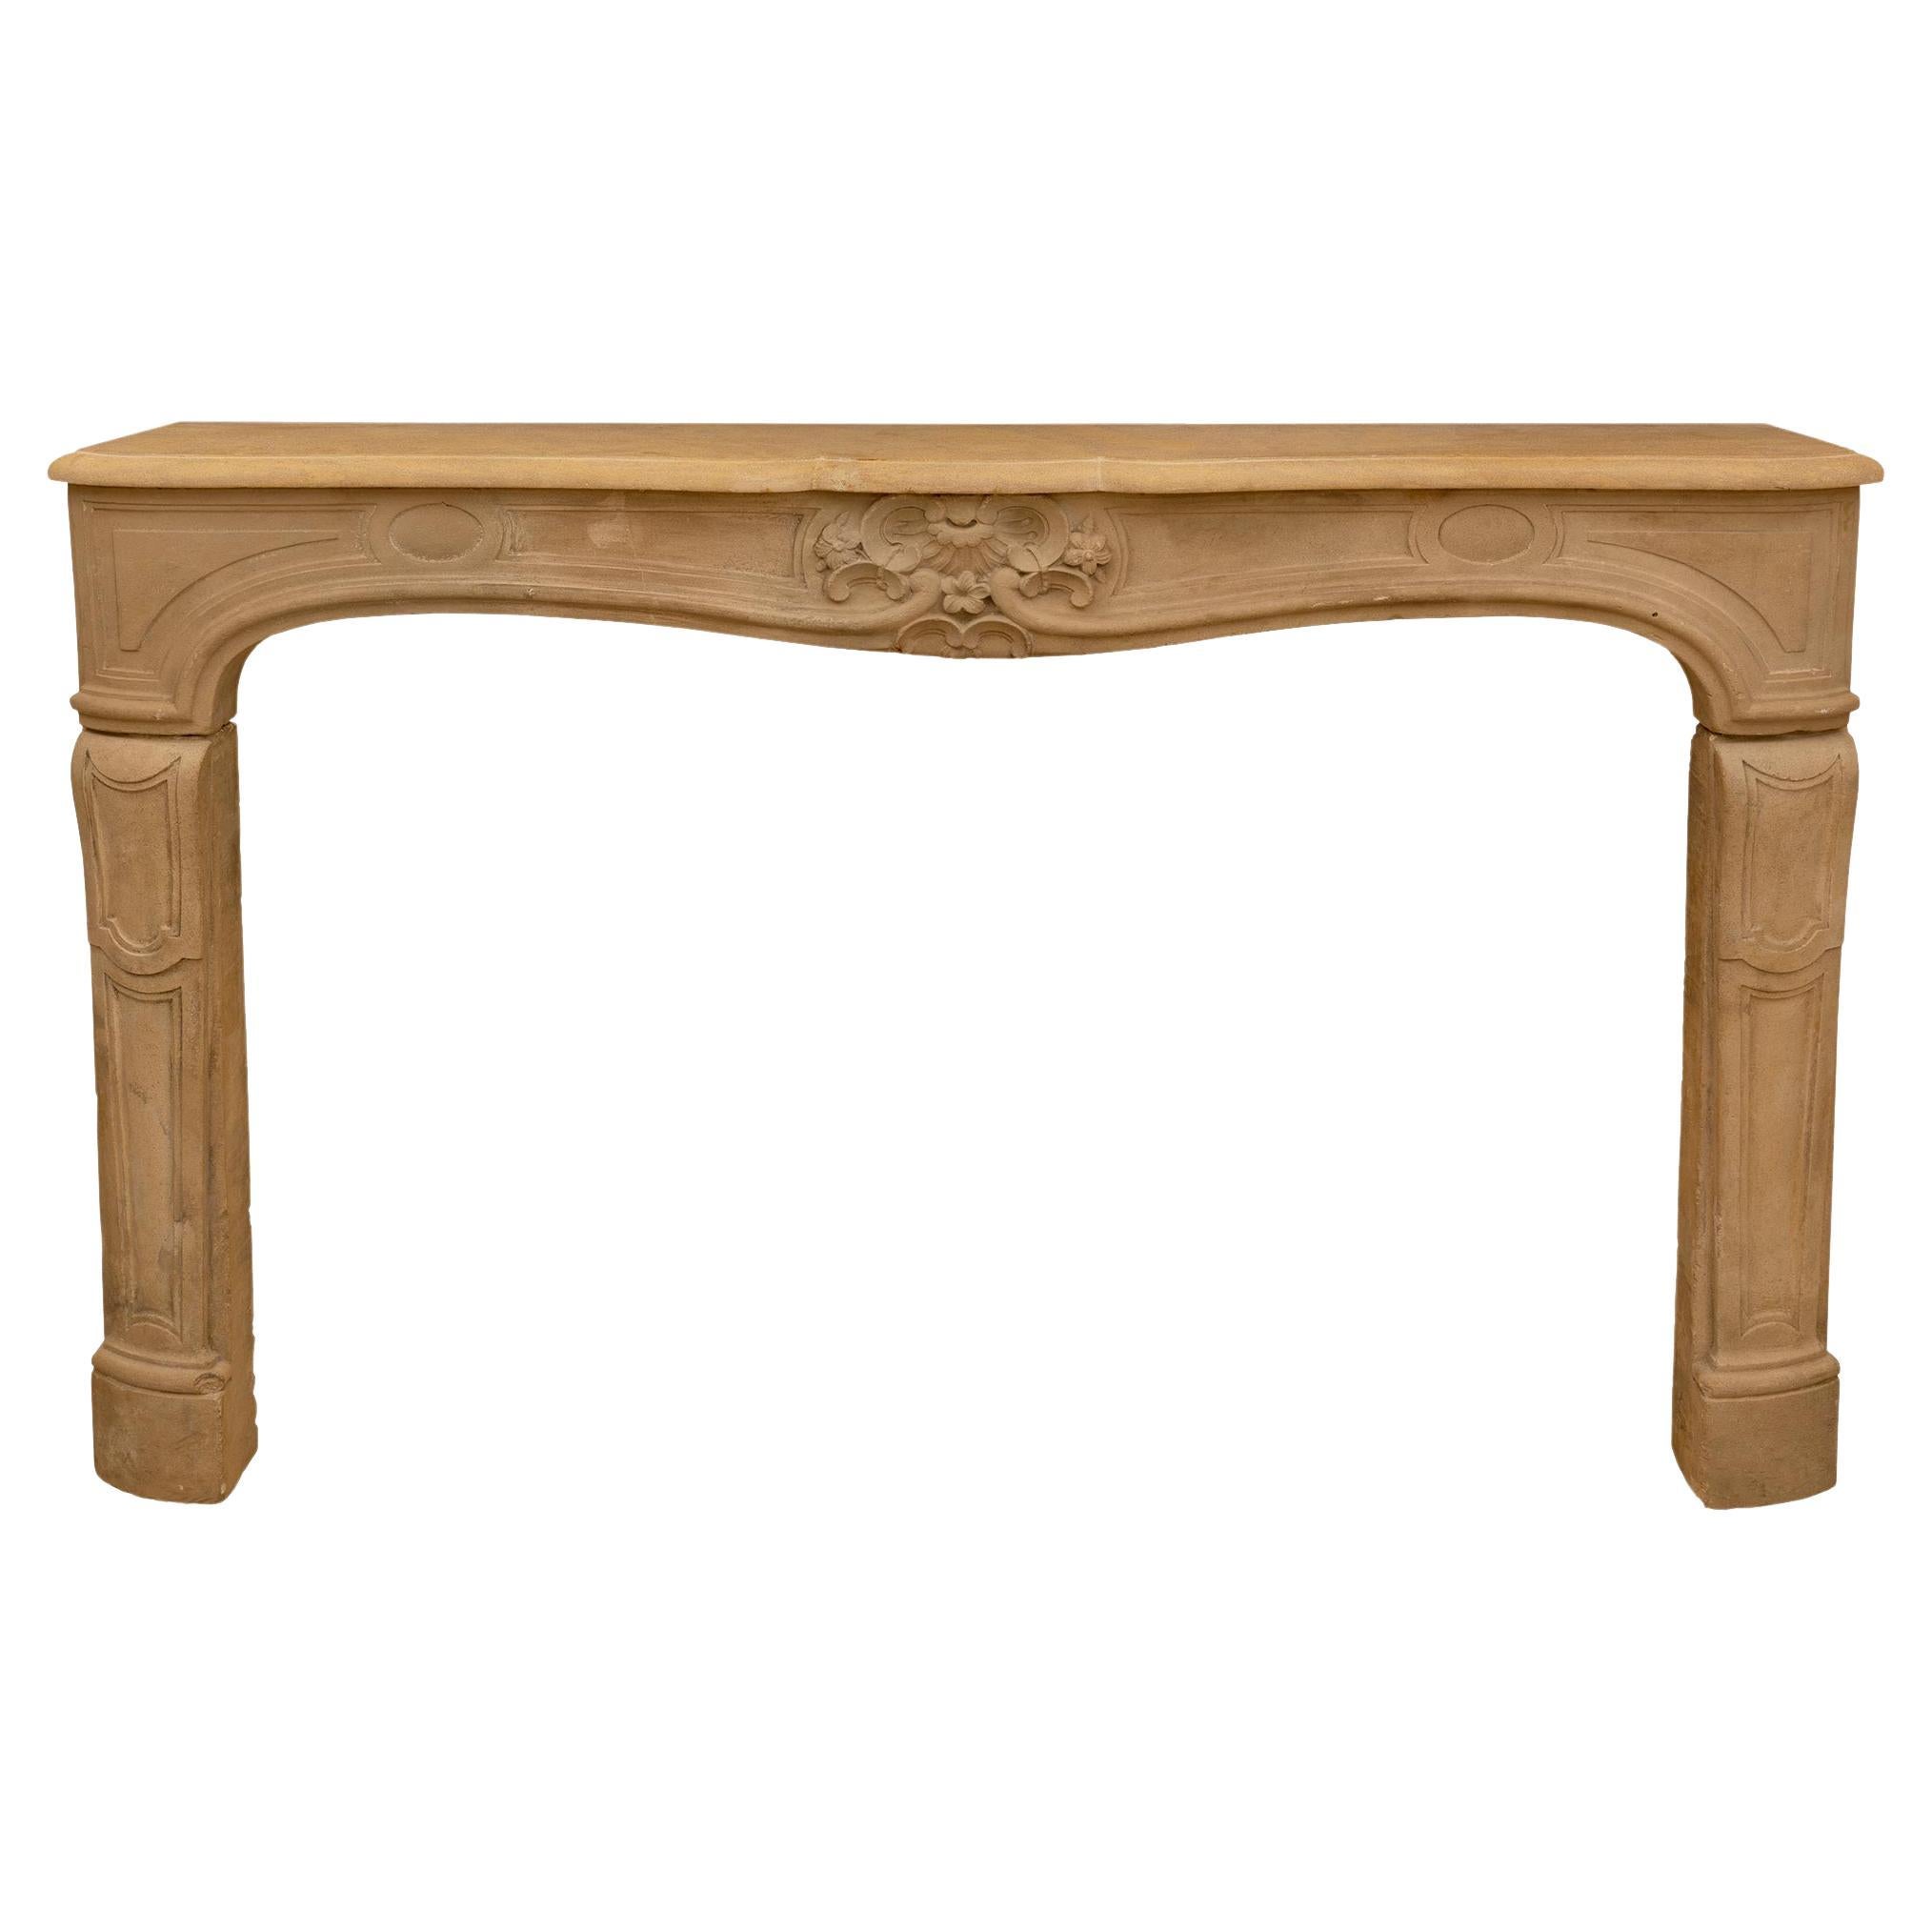 French Early 19th Century Louis XV Style Limestone Fireplace Mantel For Sale